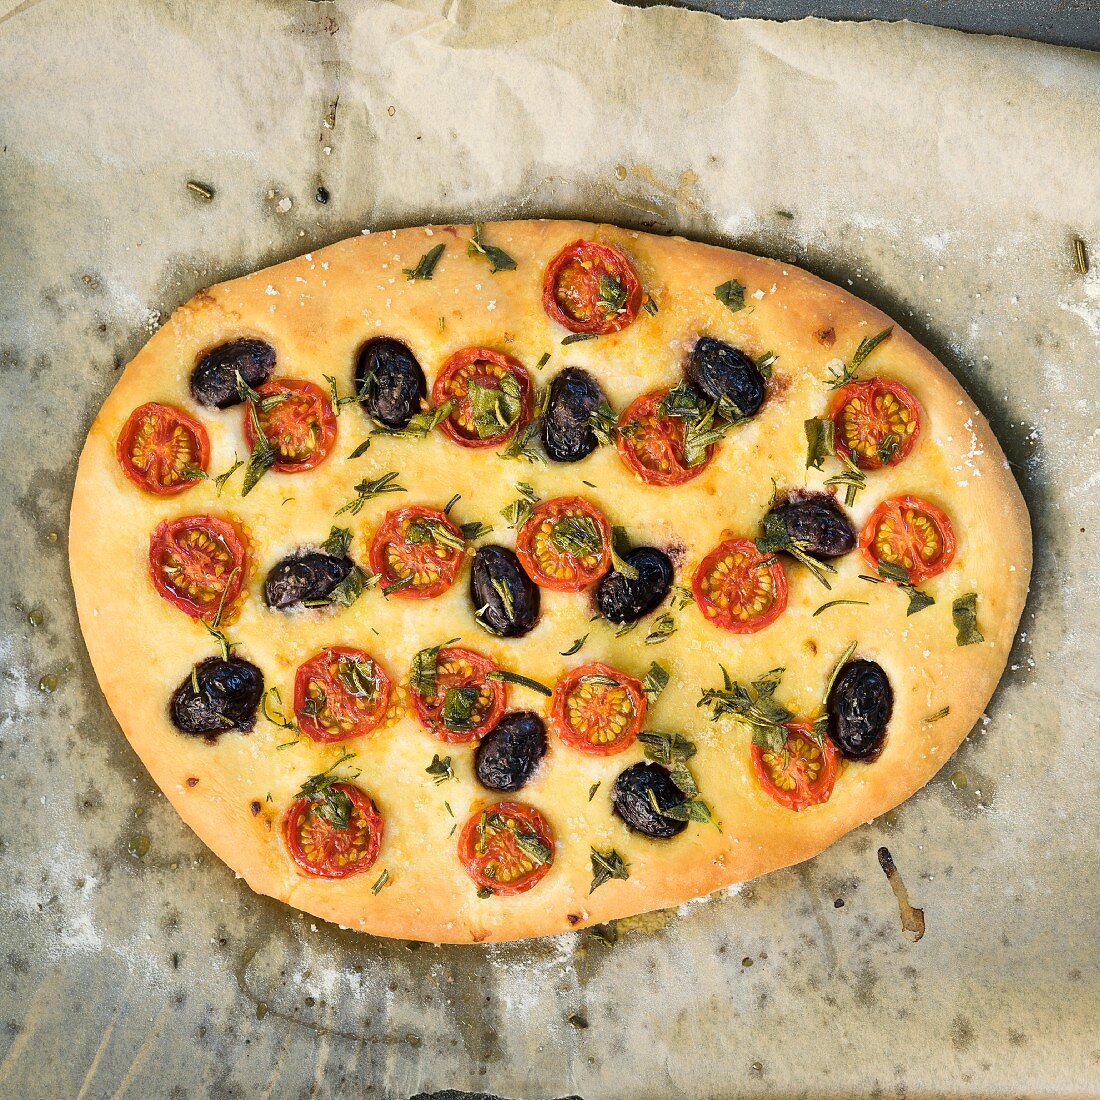 Vegan focaccia with cherry tomatoes and black olives